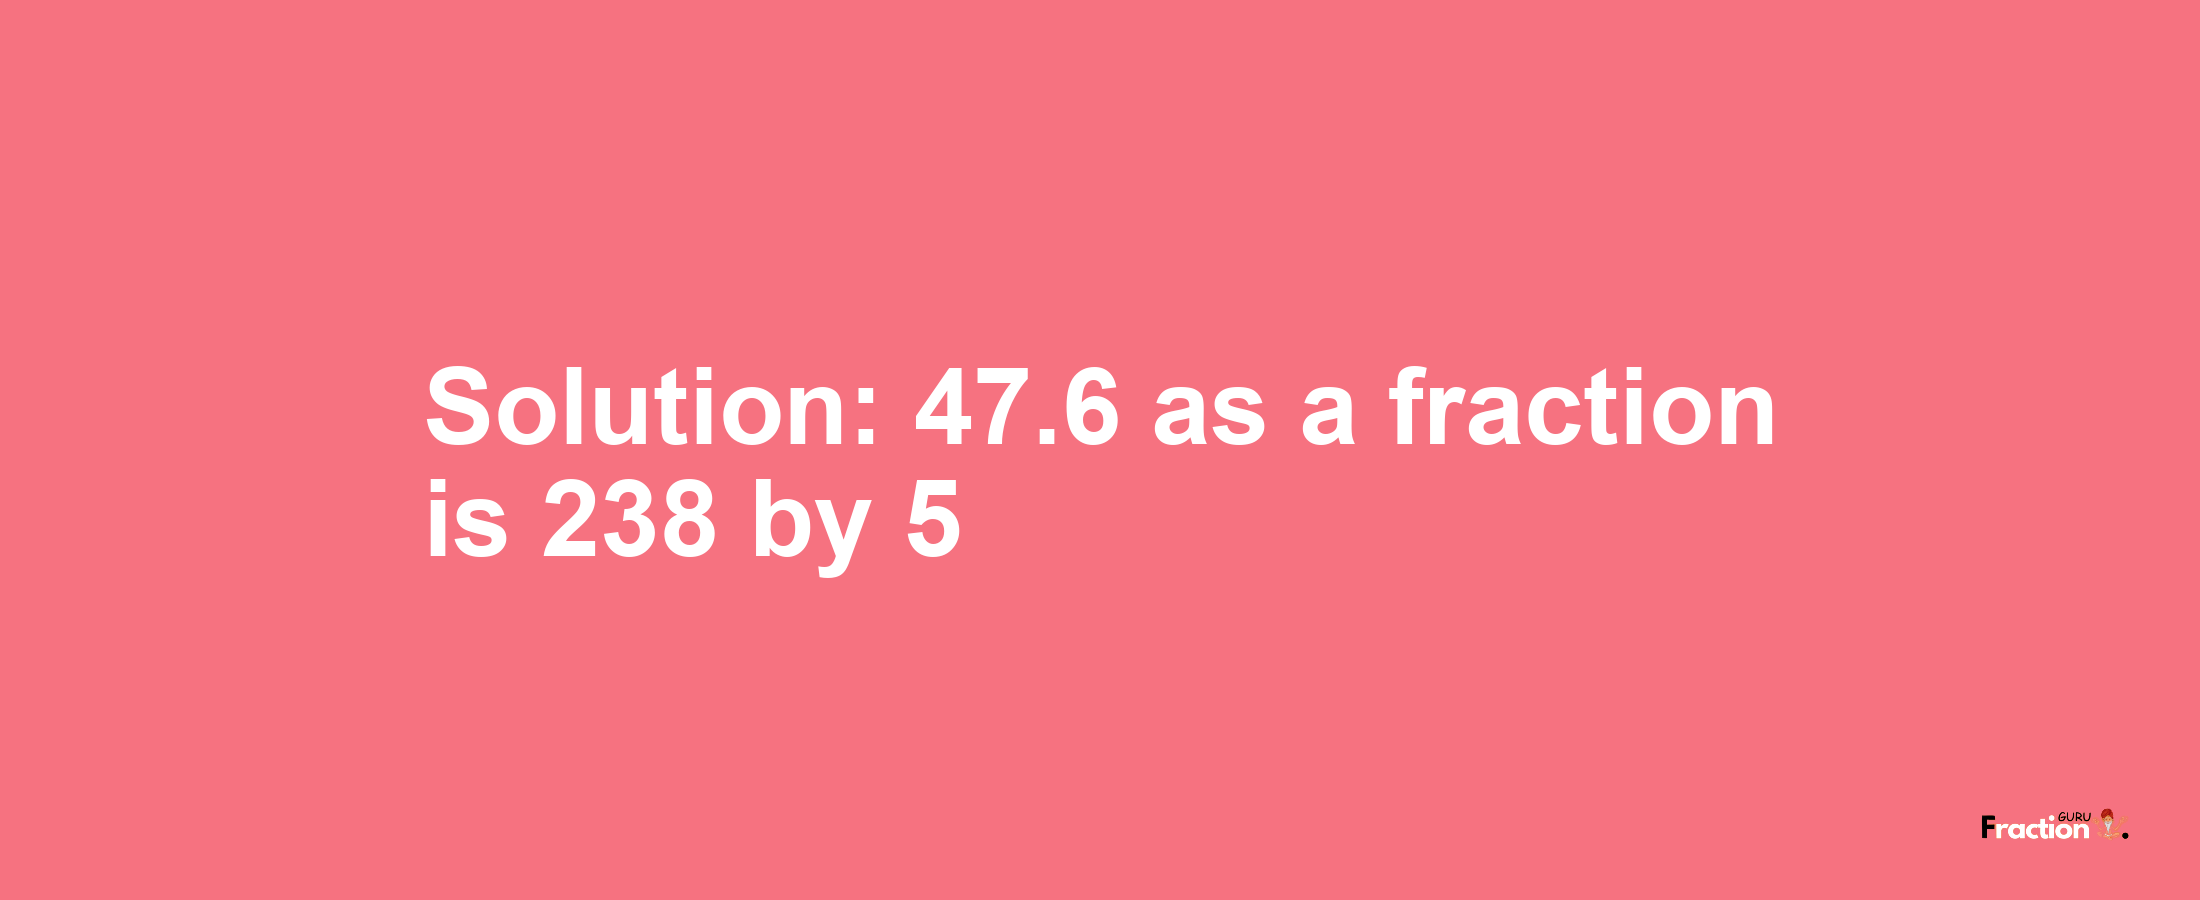 Solution:47.6 as a fraction is 238/5